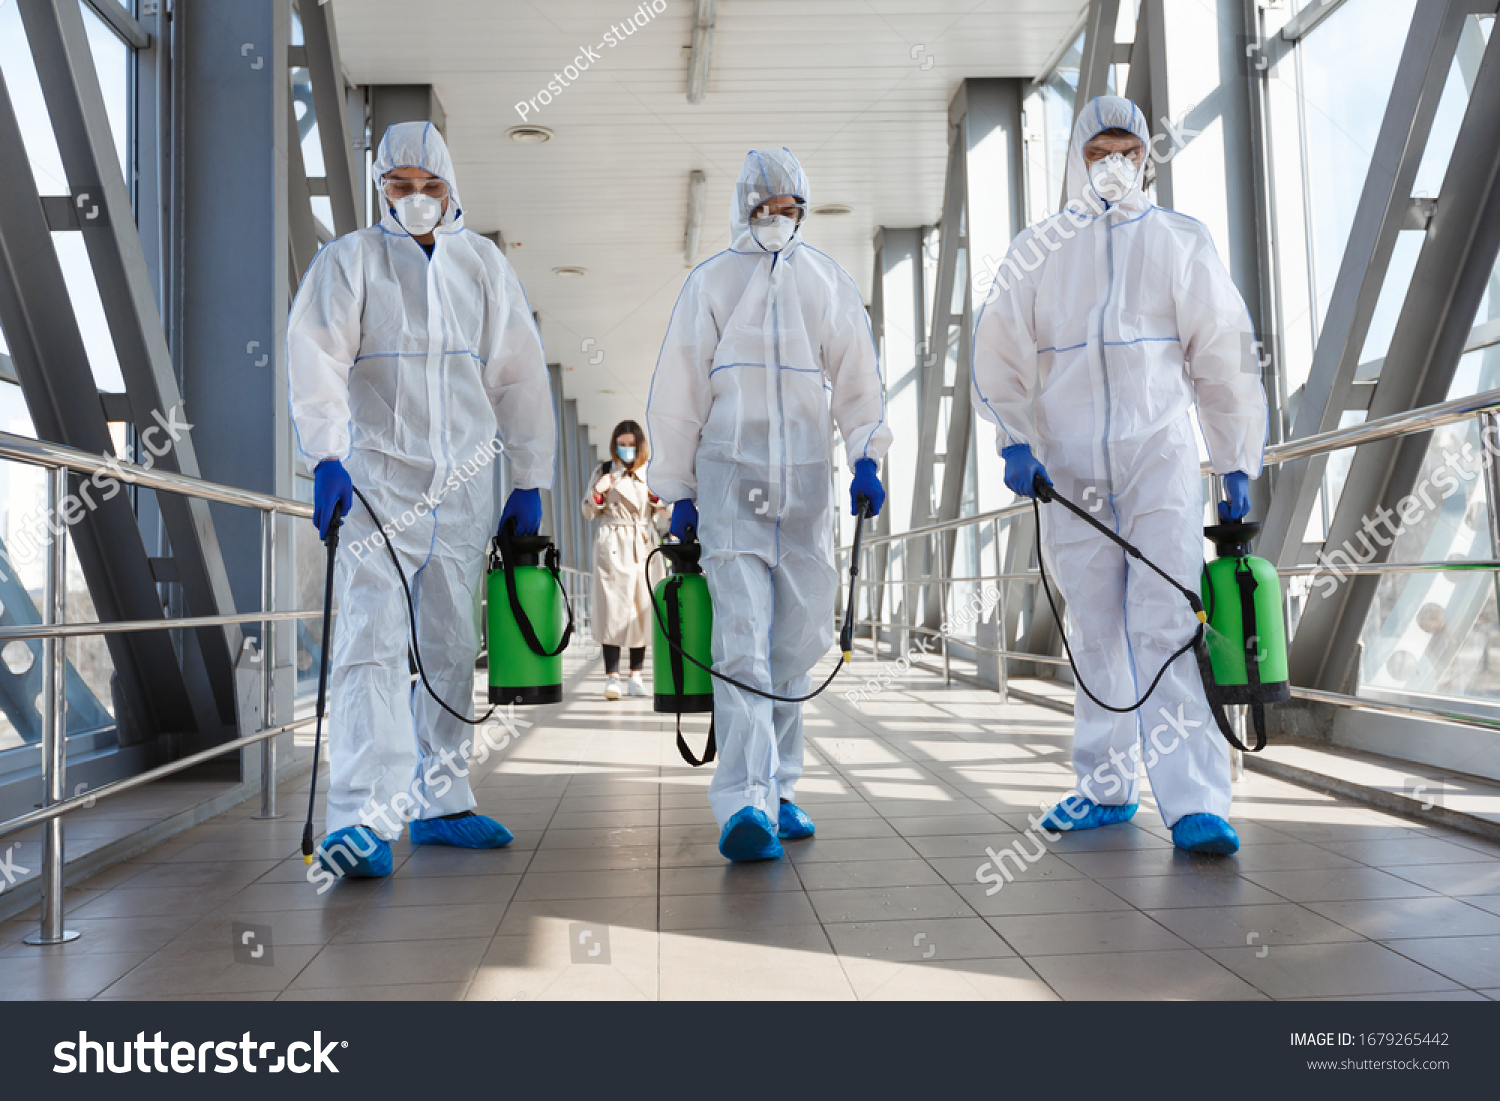 Specialist in hazmat suits cleaning disinfecting coronavirus cells epidemic, pandemic health risk #1679265442